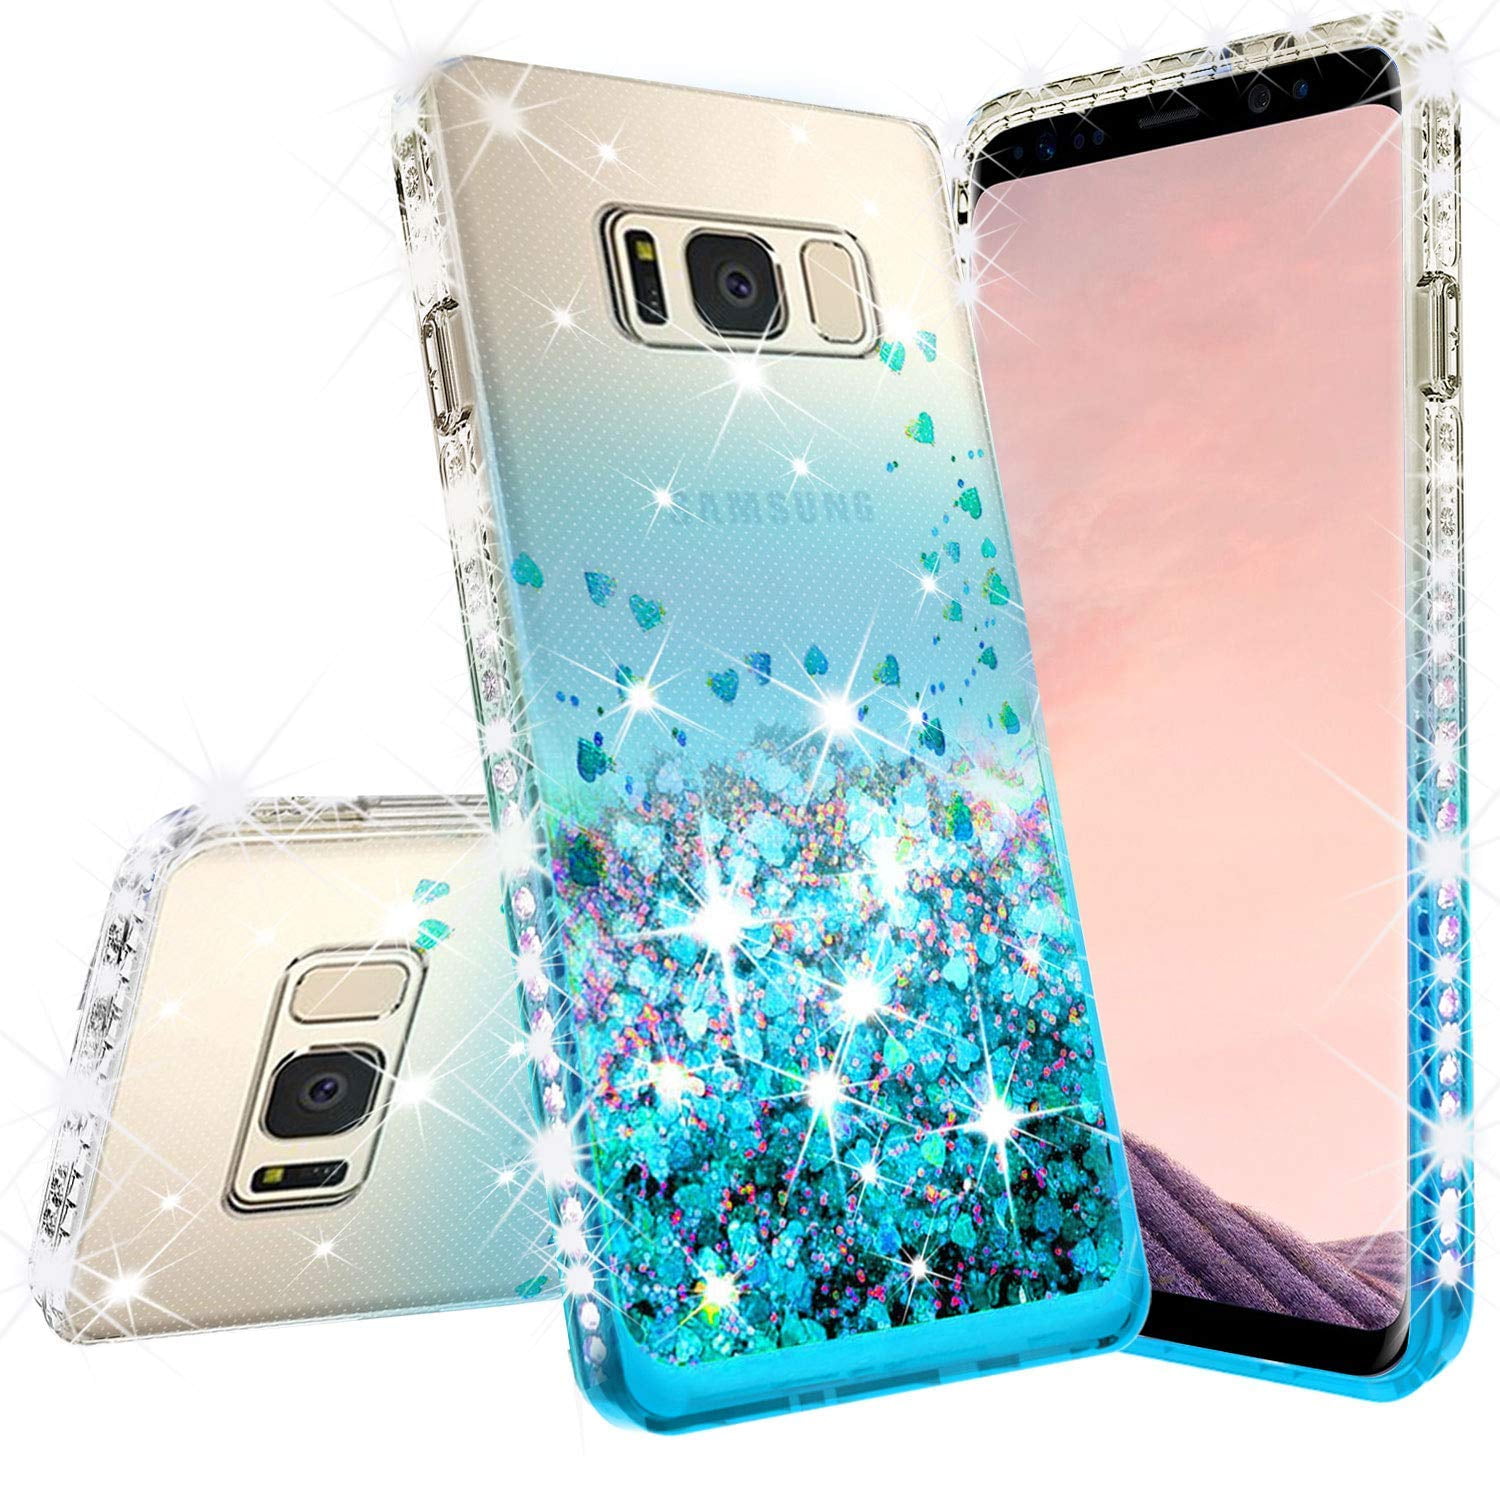 JAWSEU Compatible with Samsung Galaxy Note 9 Case Bling Glitter Sparkly Stars Design Soft Slim TPU Silicone Gel Rubber Bumper Case Ultra Thin Shockproof Full Protective Case Cover,Black-2 